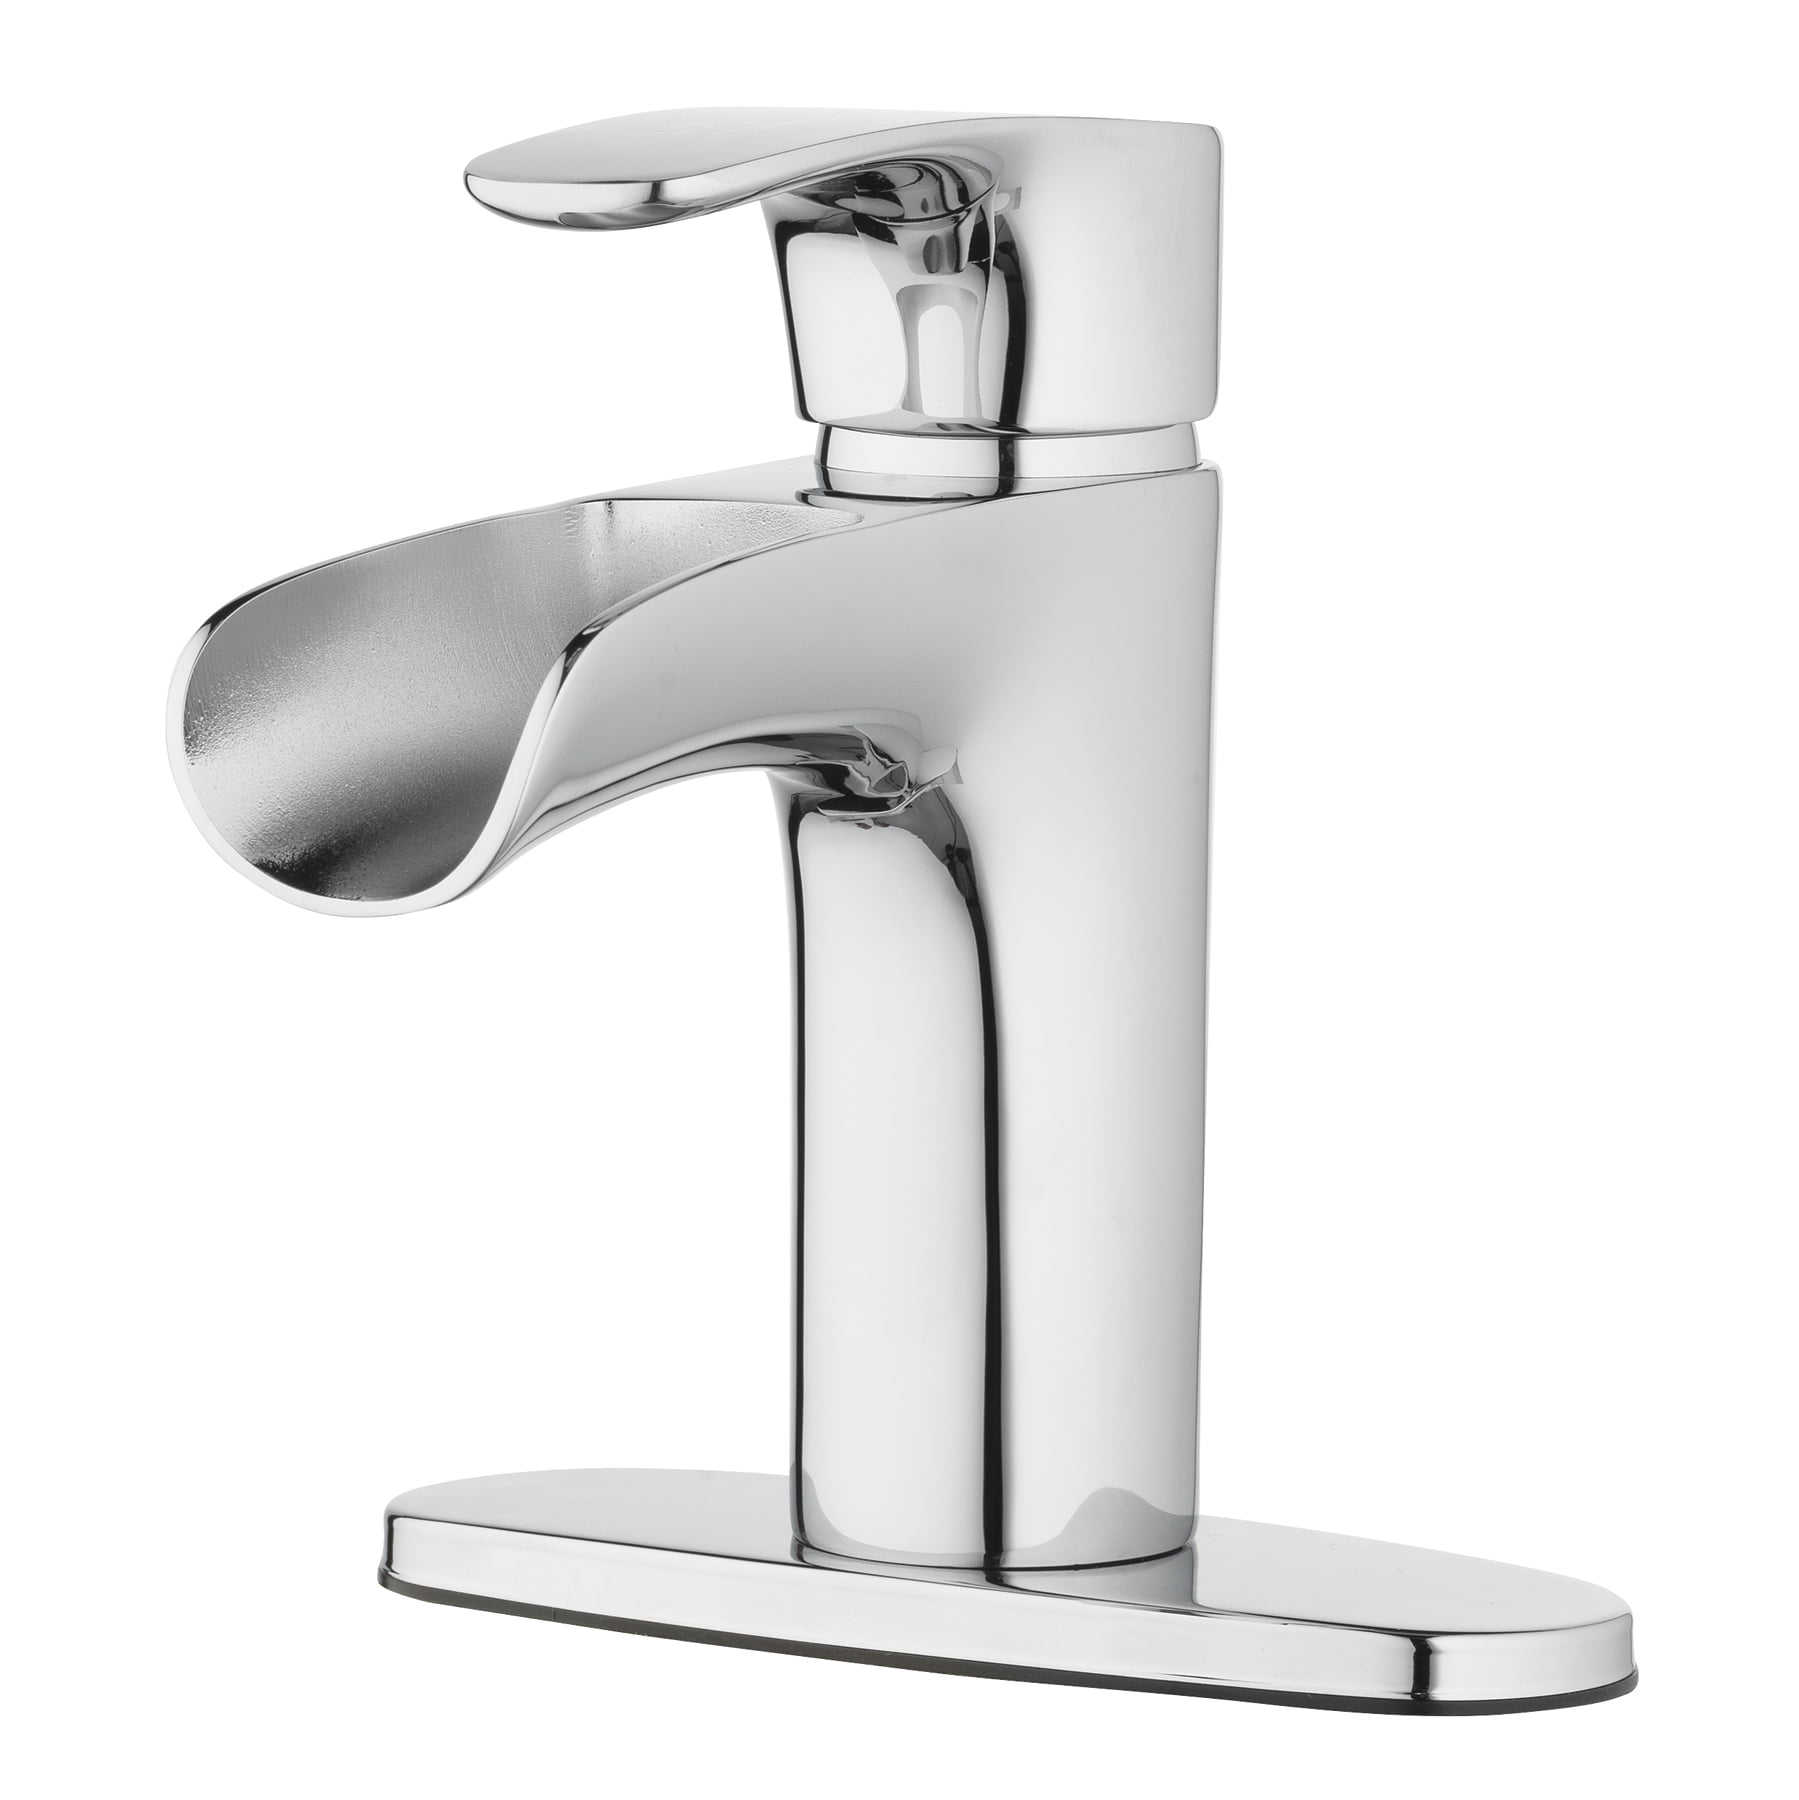 O Delta Haywood Stainless Steel Faucet Model 15999-SS-DST 